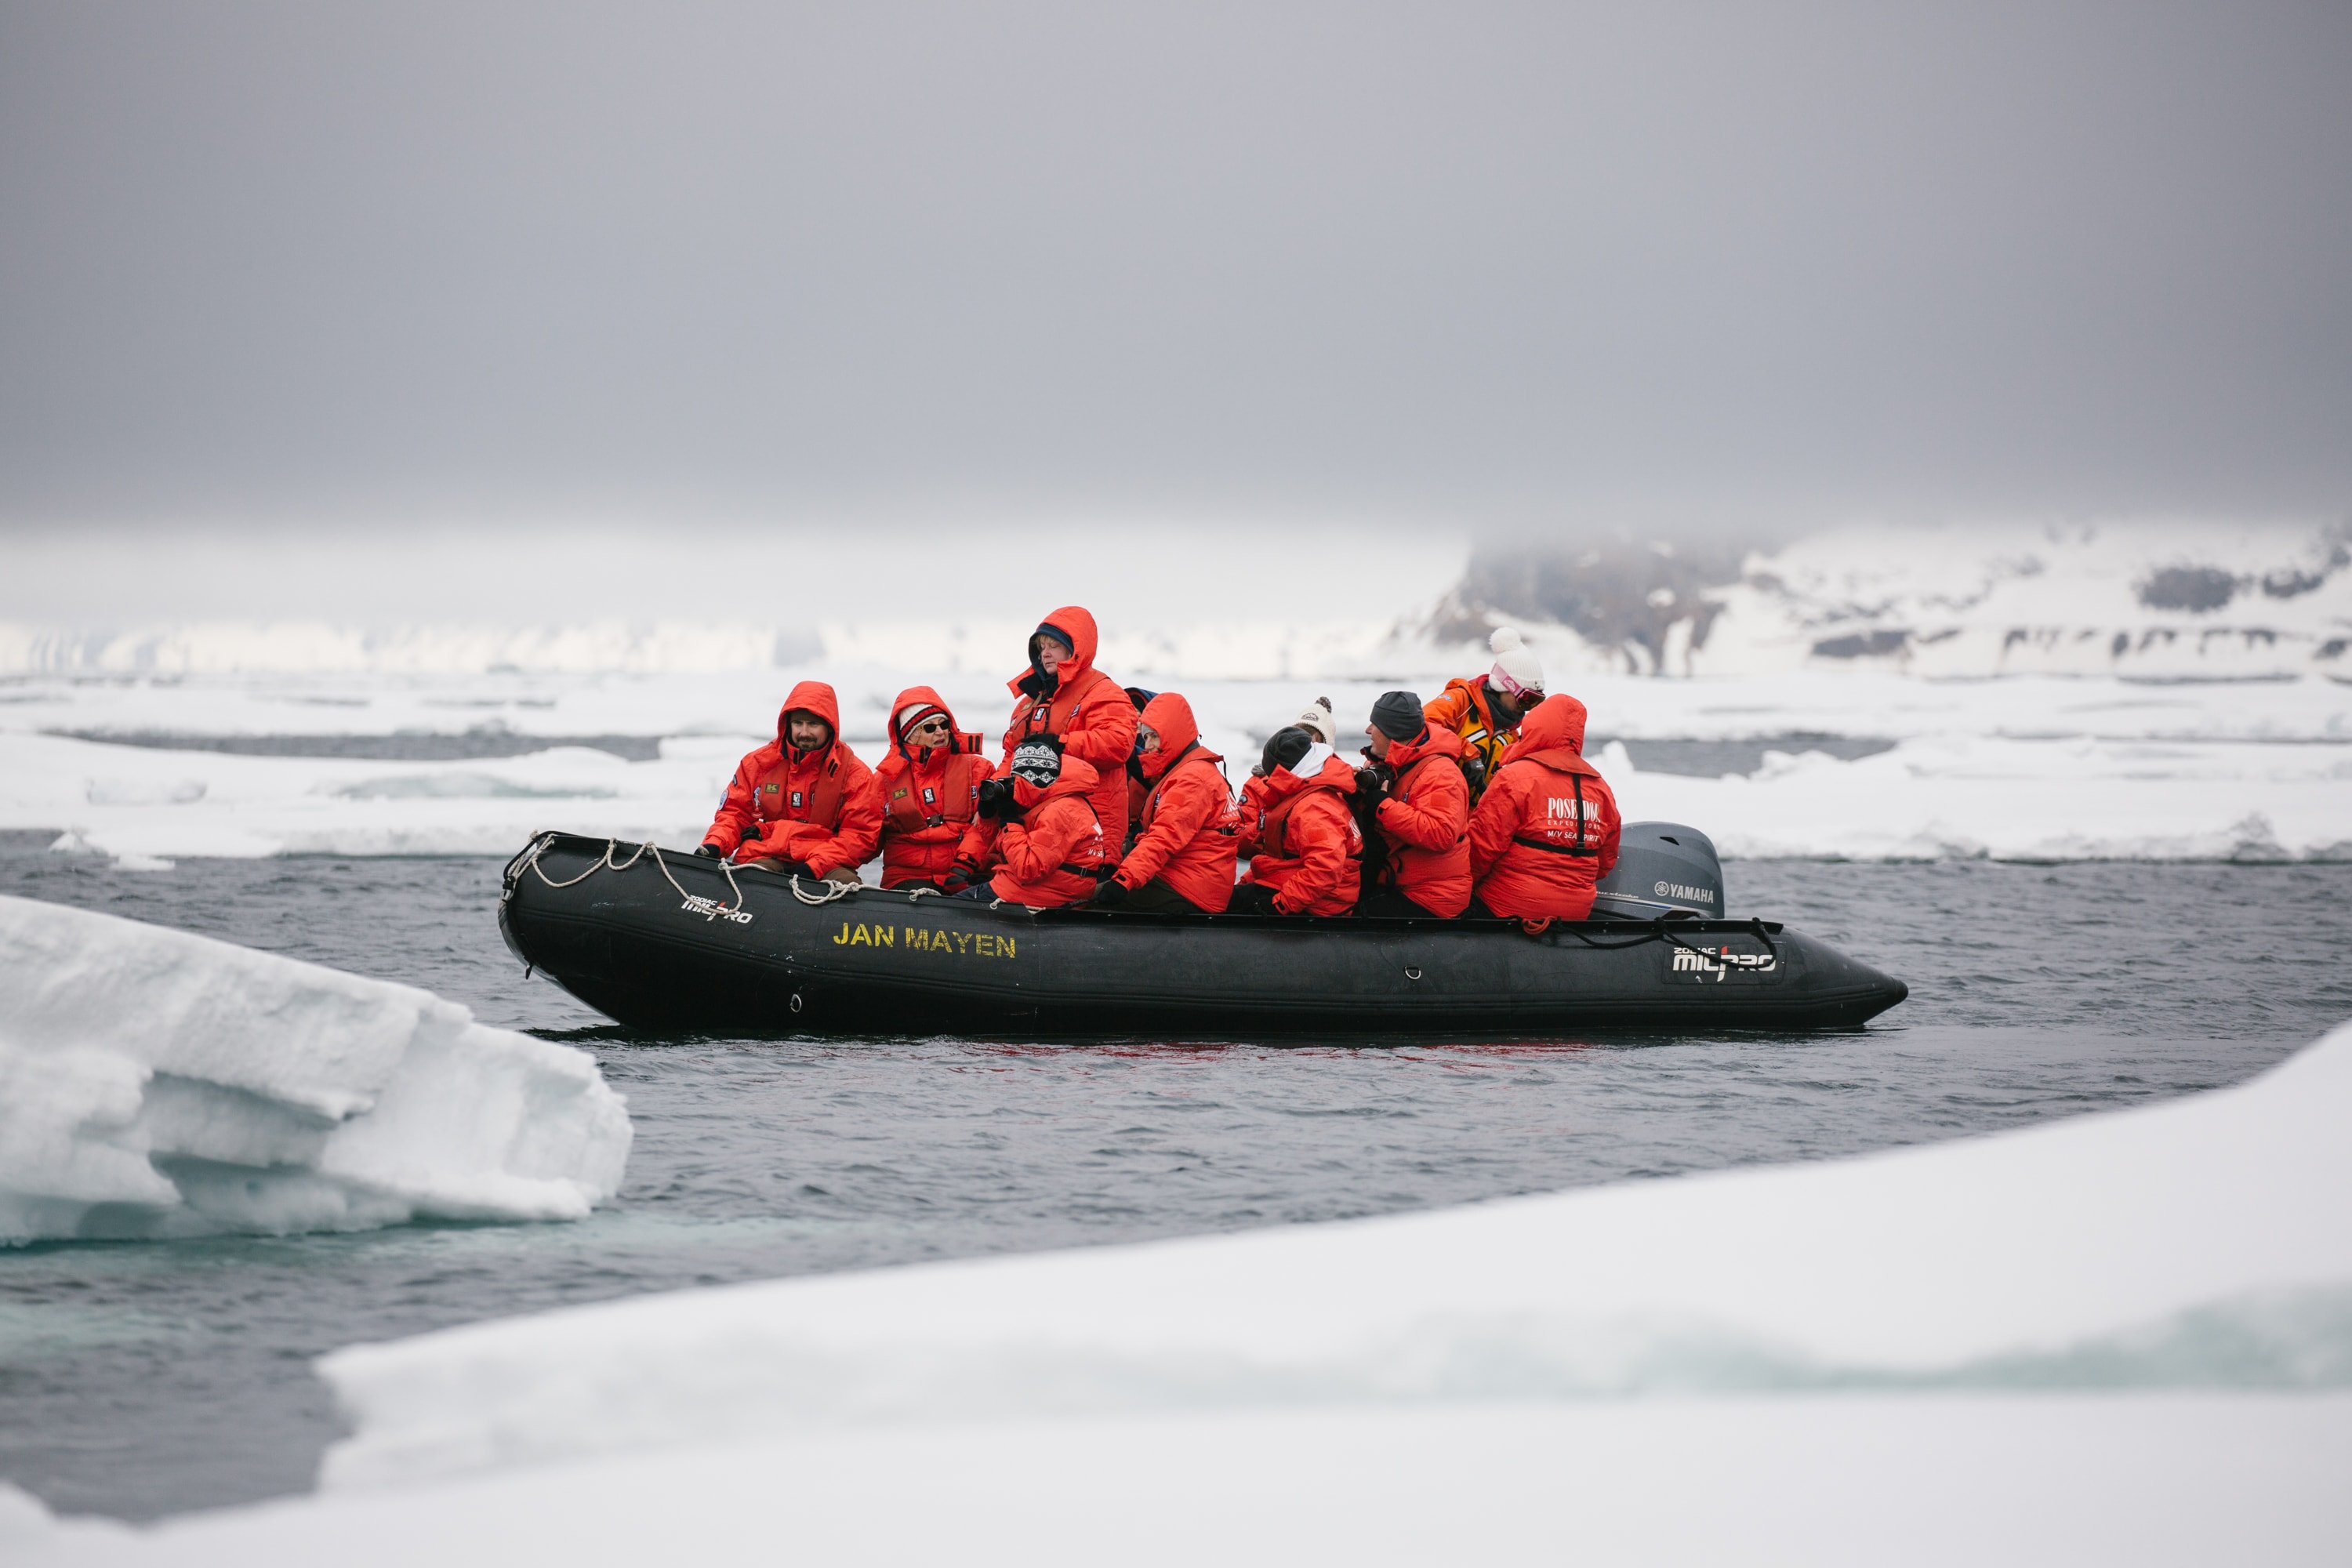 Zodiac boats used in polar expedition cruising